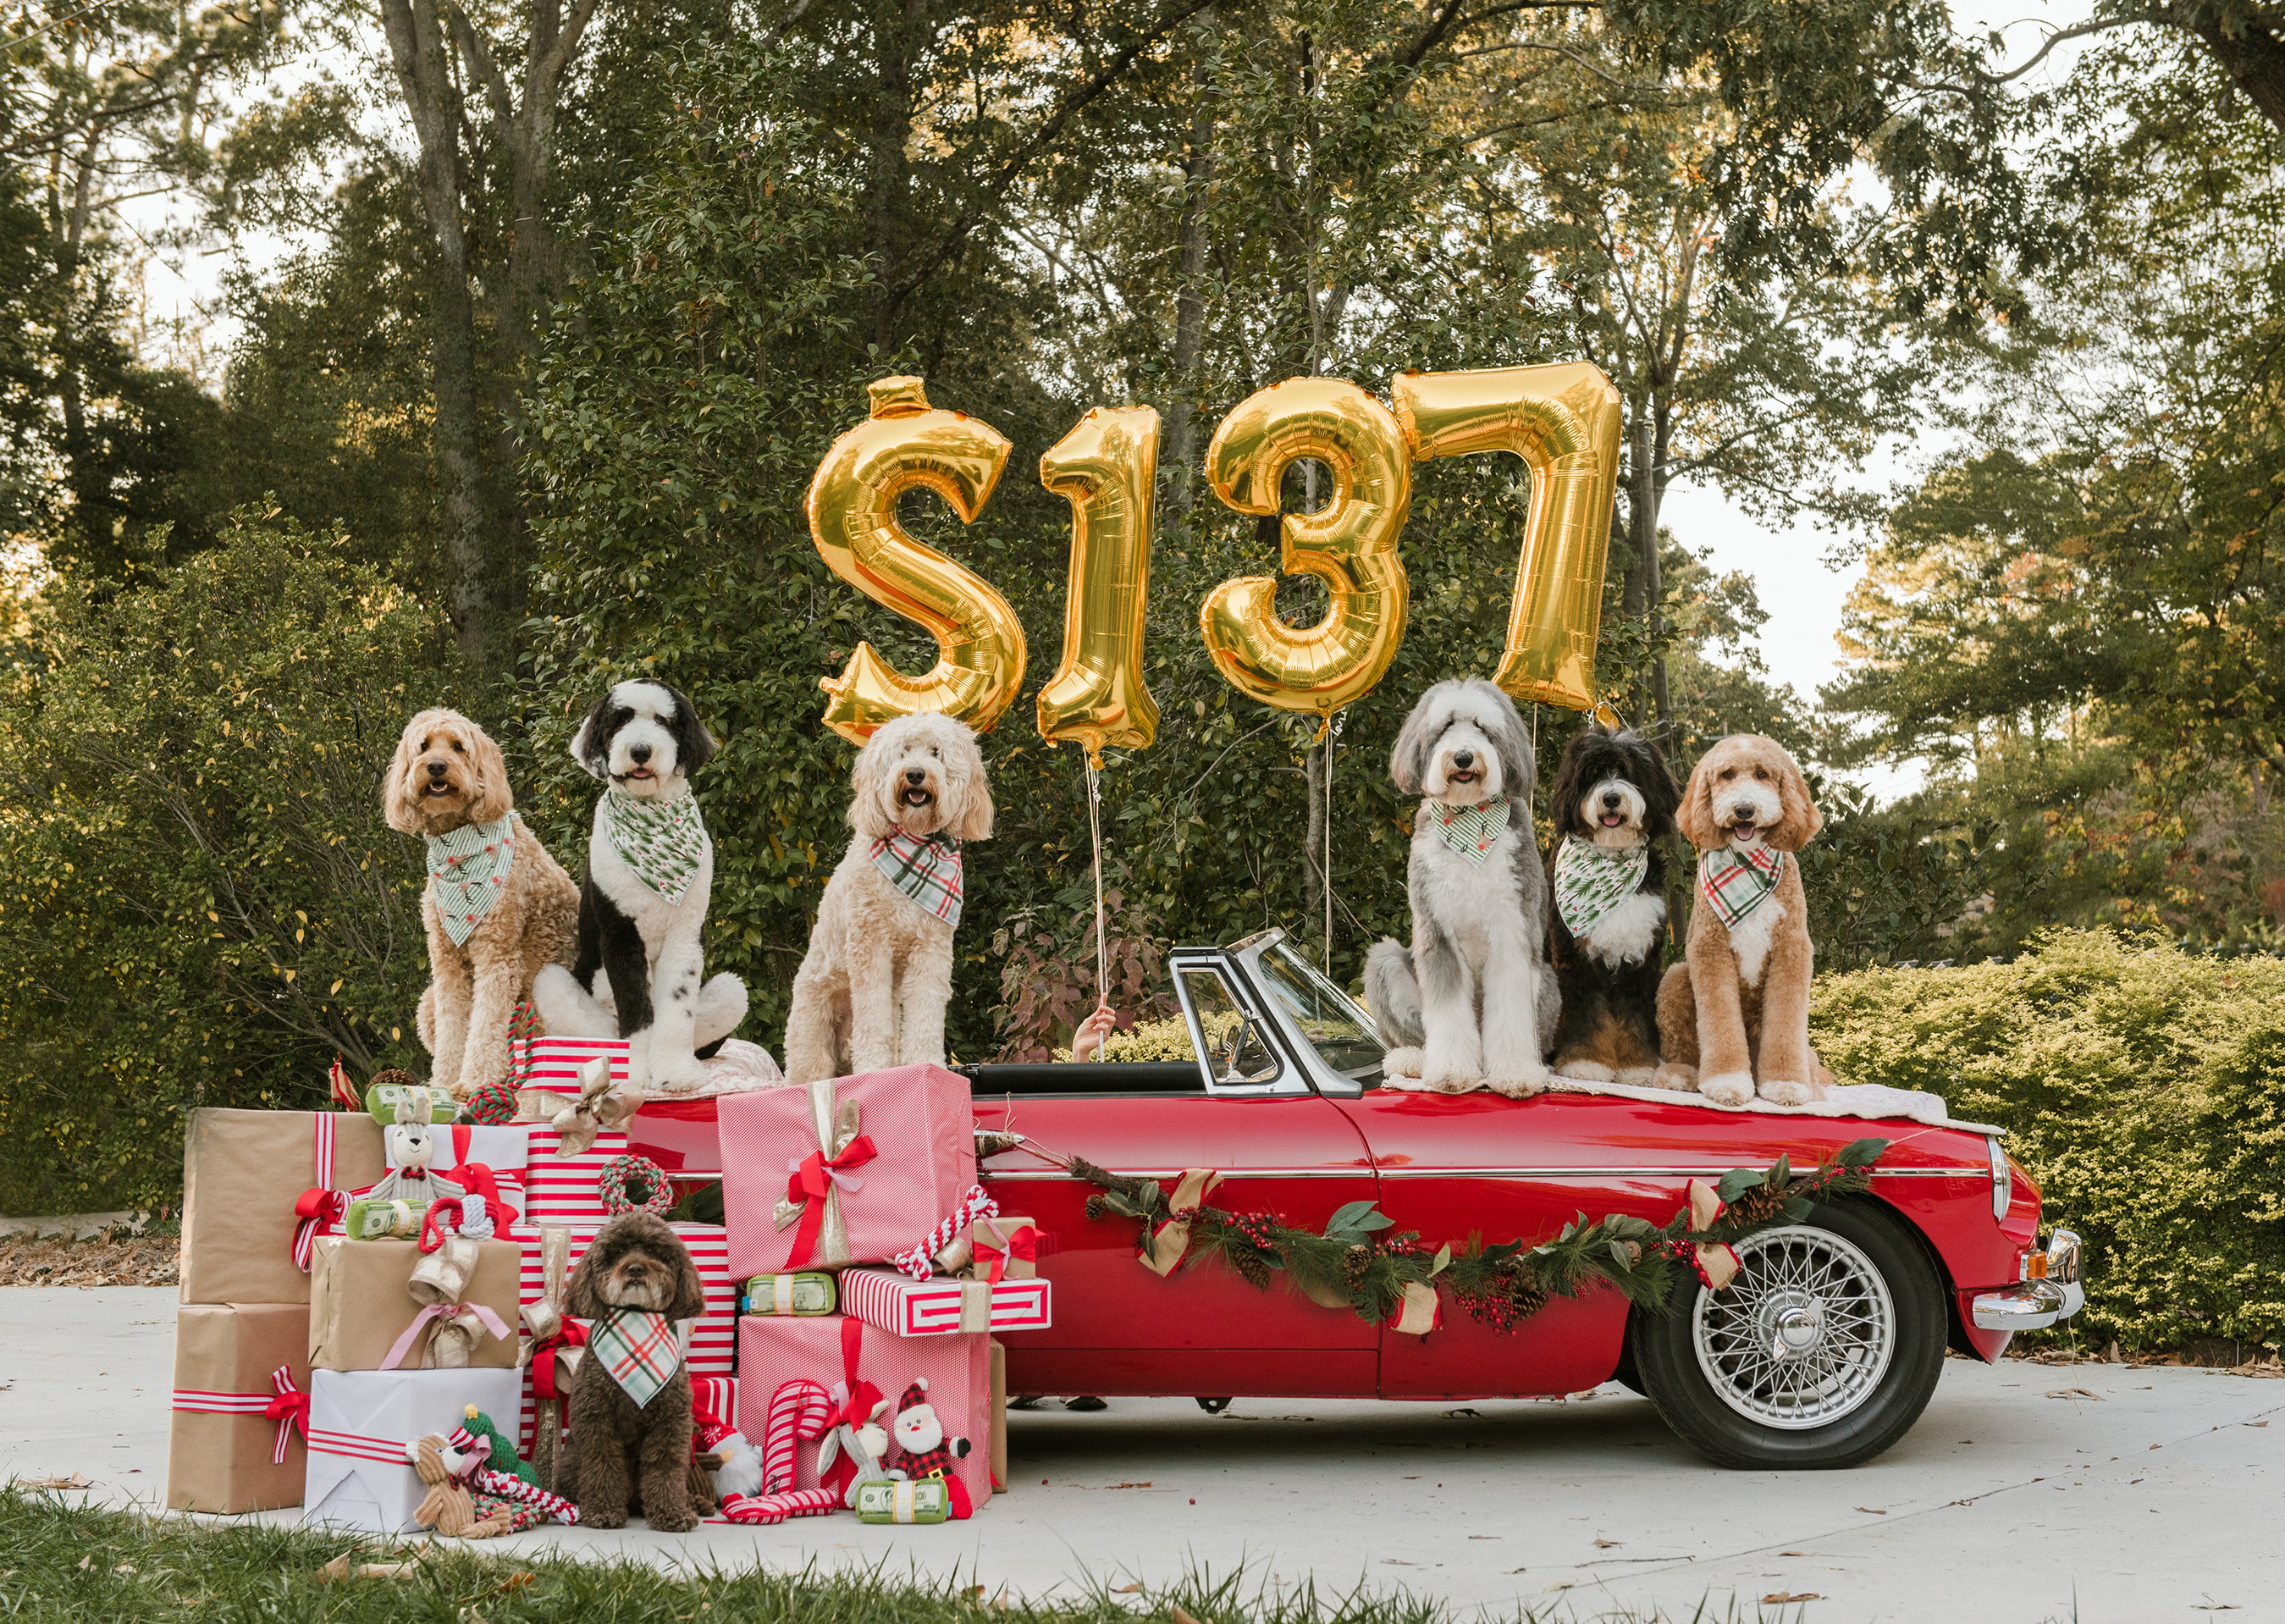 Bells Will Be Ringing, Tails Will Be Wagging: Pet Owners to Spend an Average of $137 on Furry Friends During Holidays